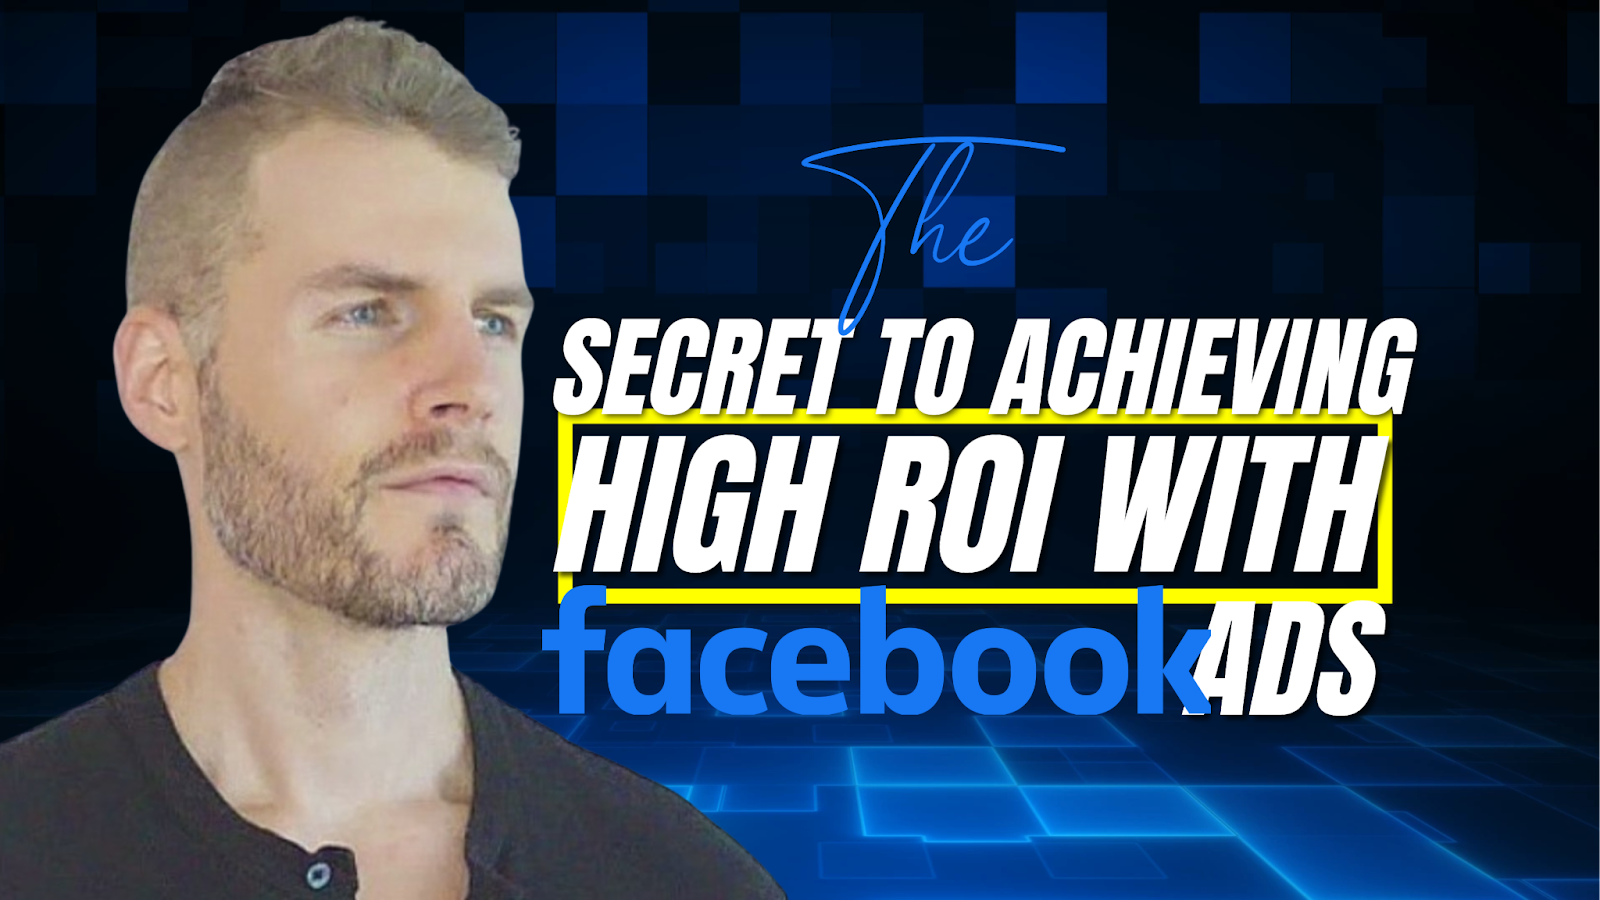 The Secret to Achieving High ROI with Facebook Ads